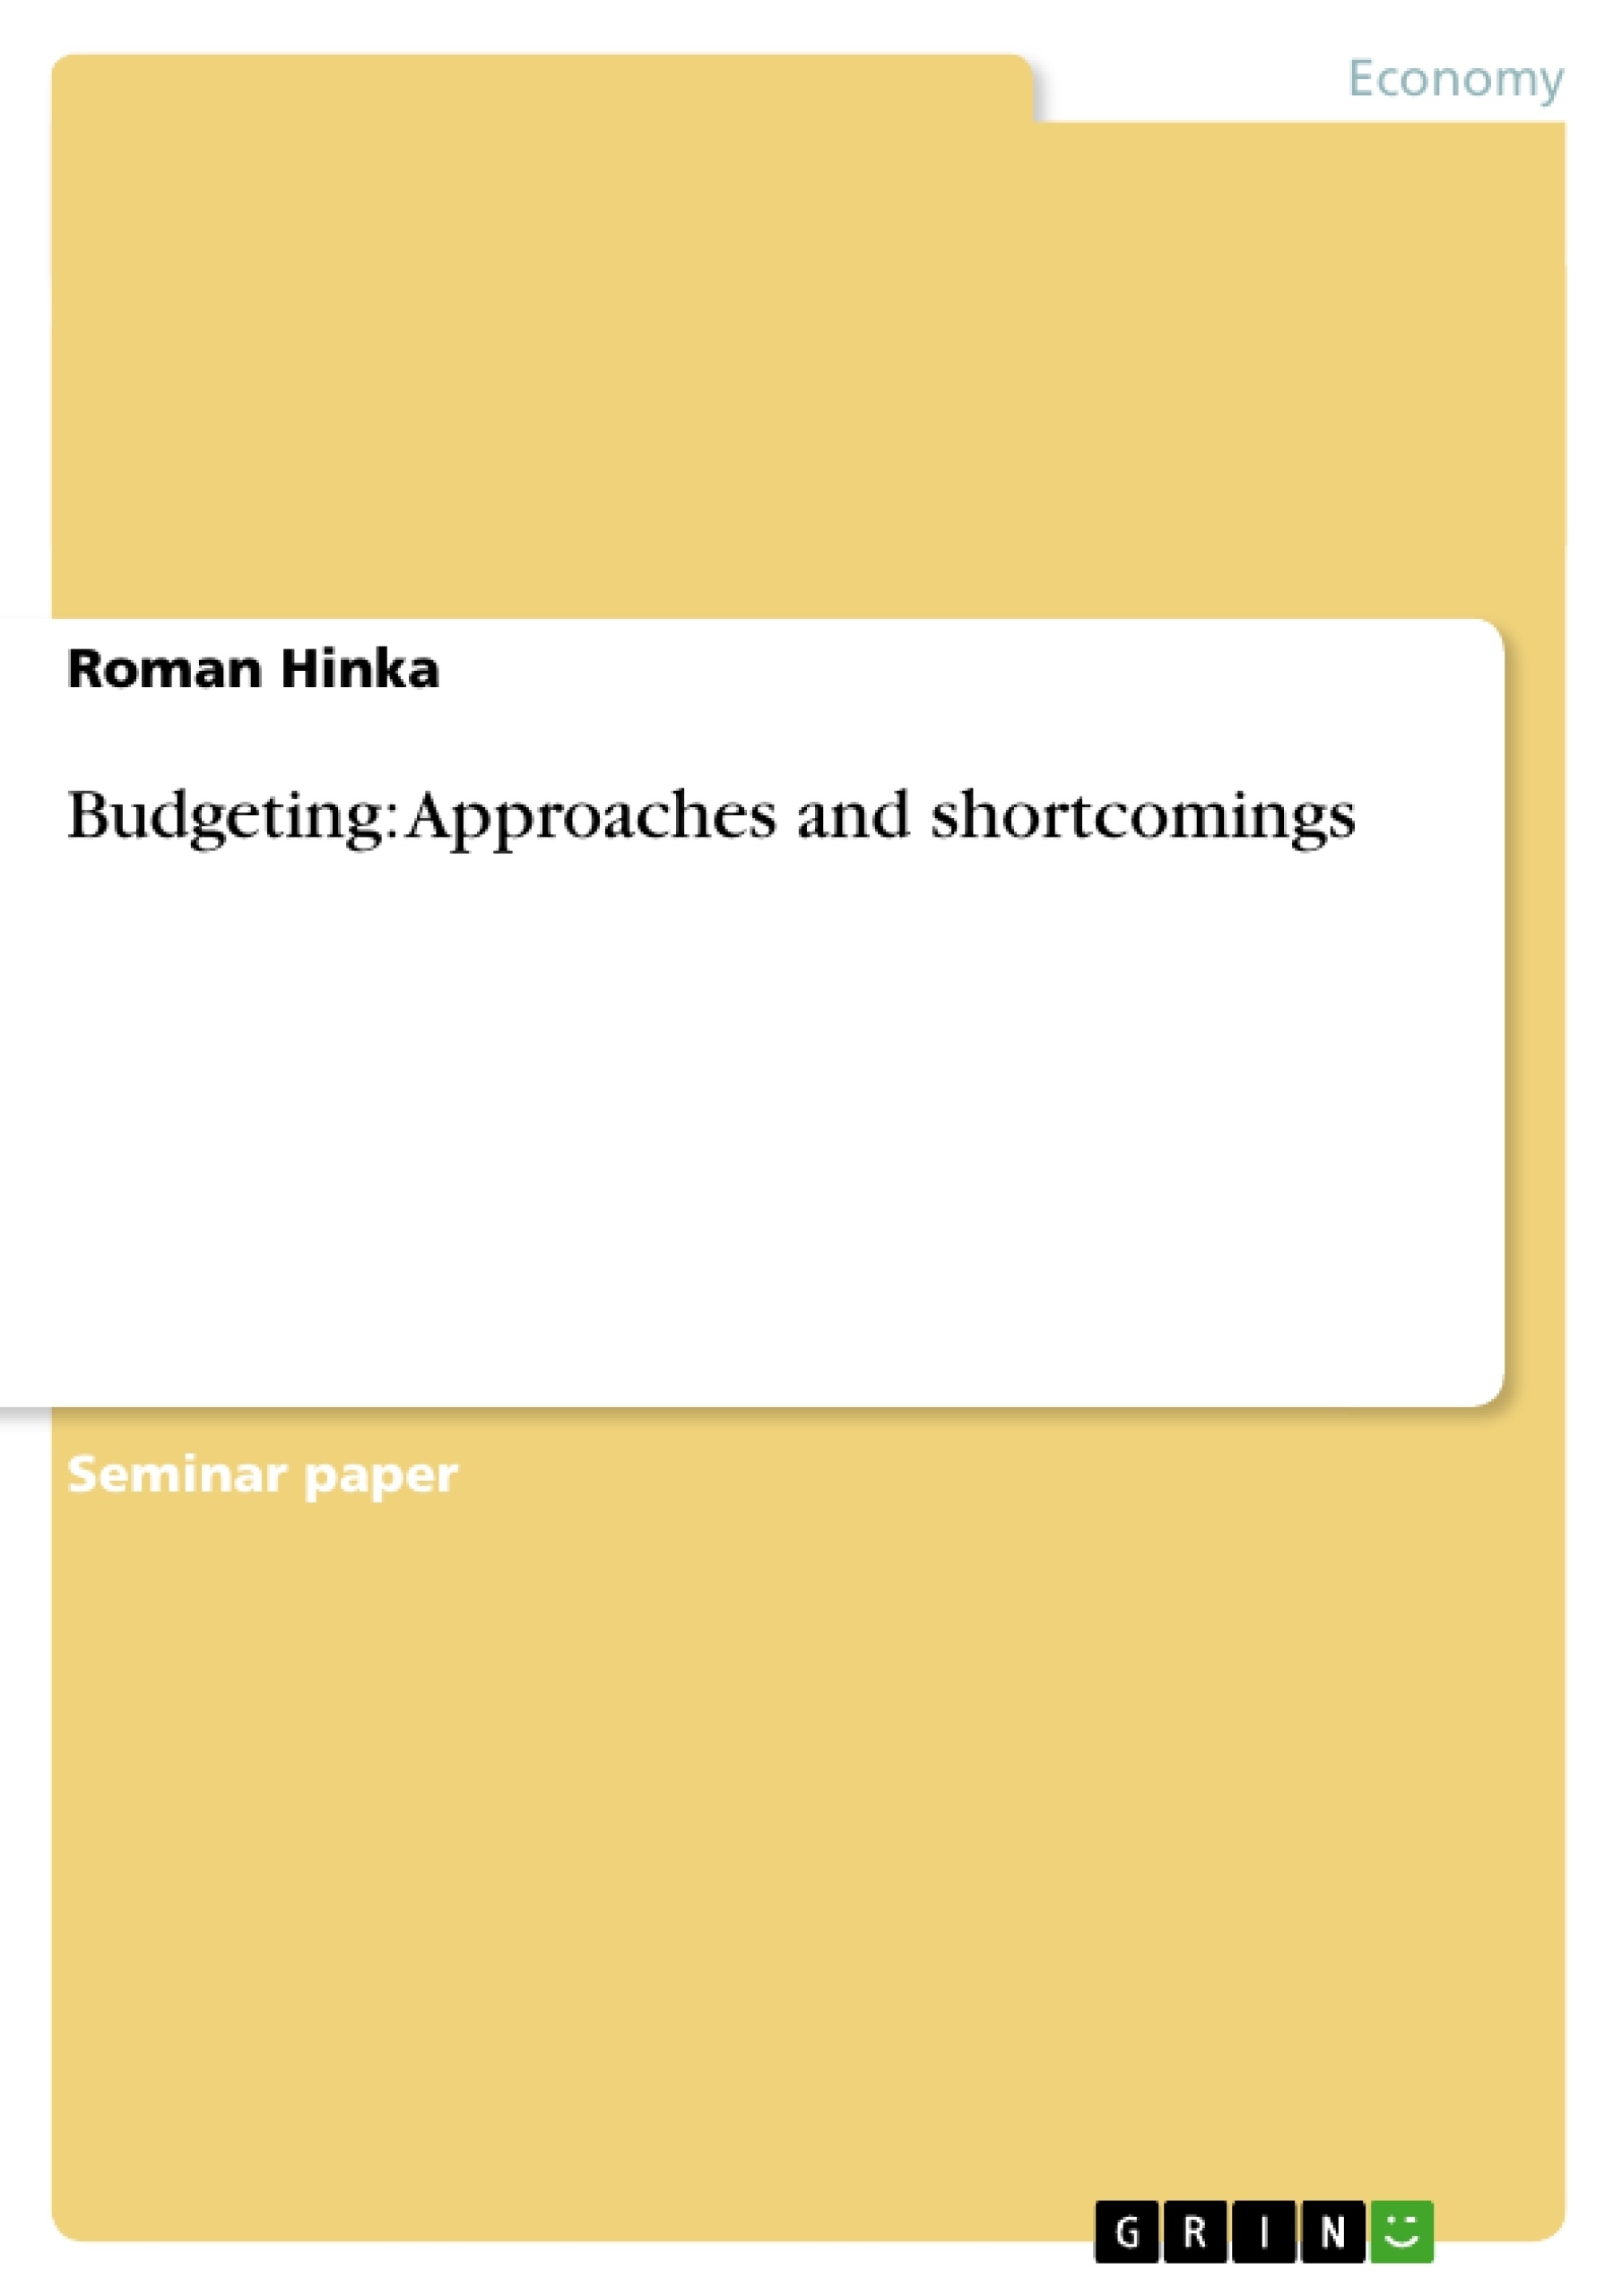 Title: Budgeting: Approaches and shortcomings